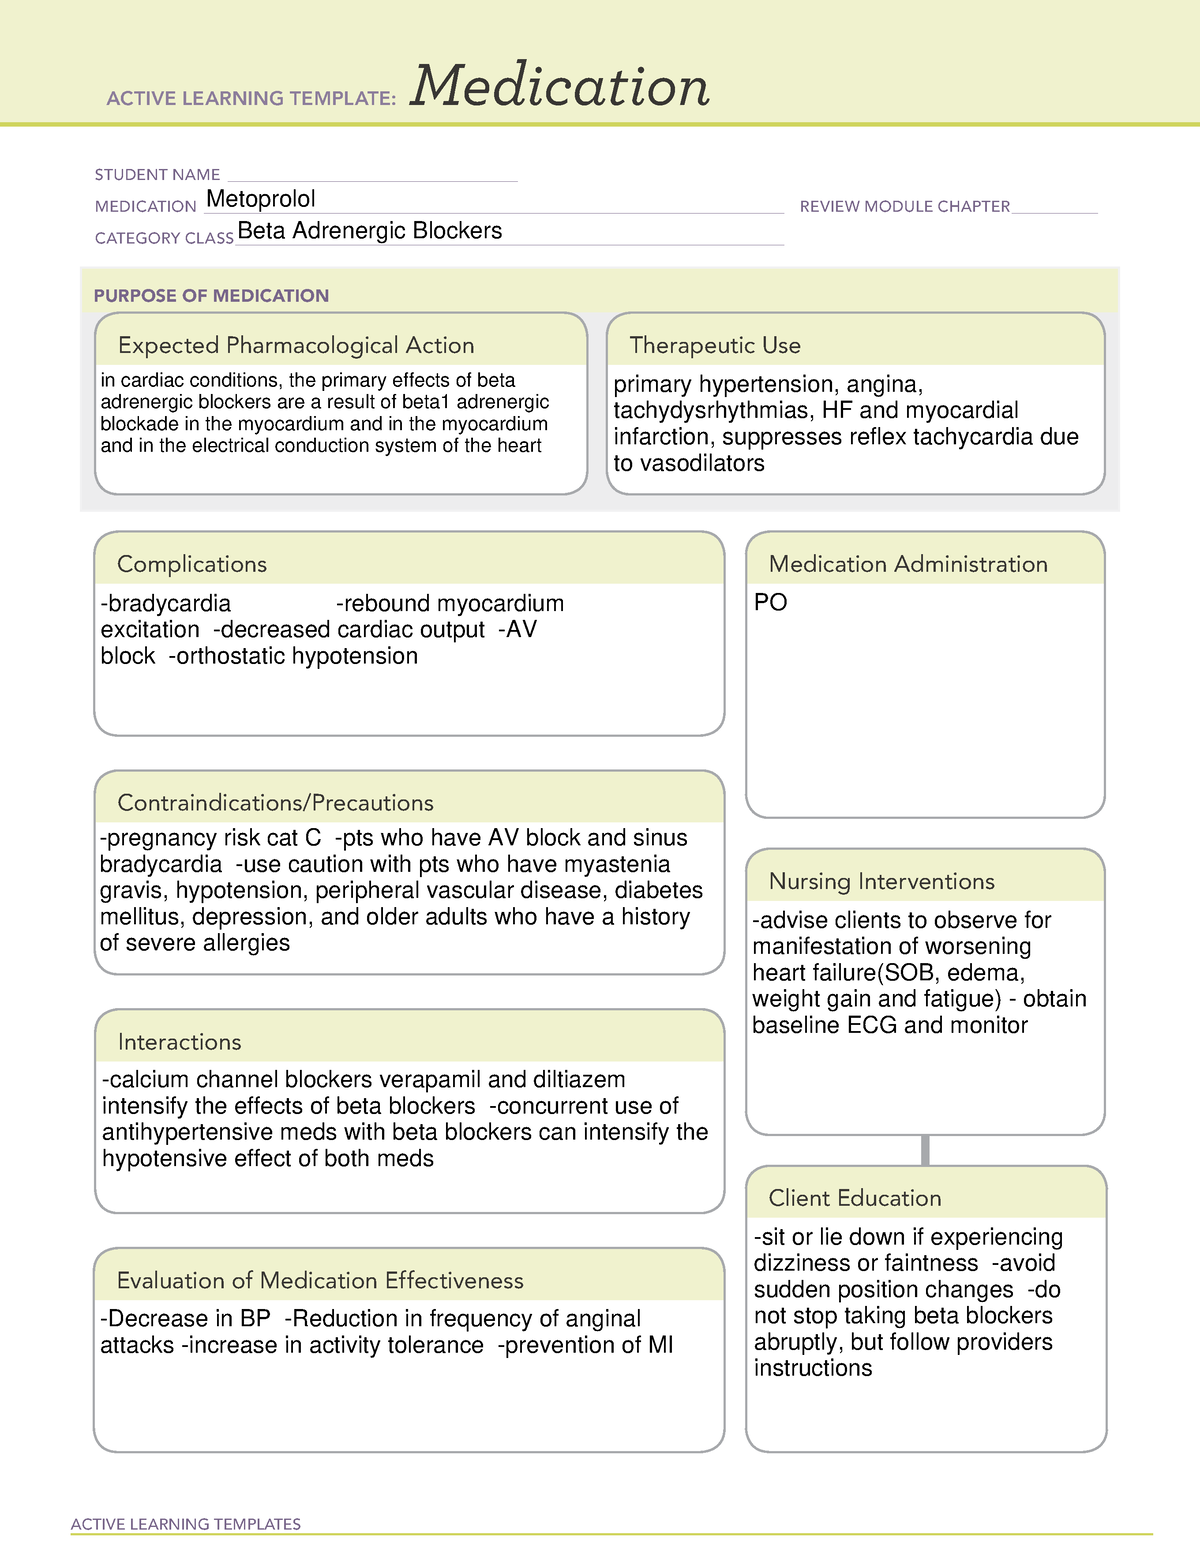 Metoprolol Med Card Medication Card for ATI and CPE testing practice